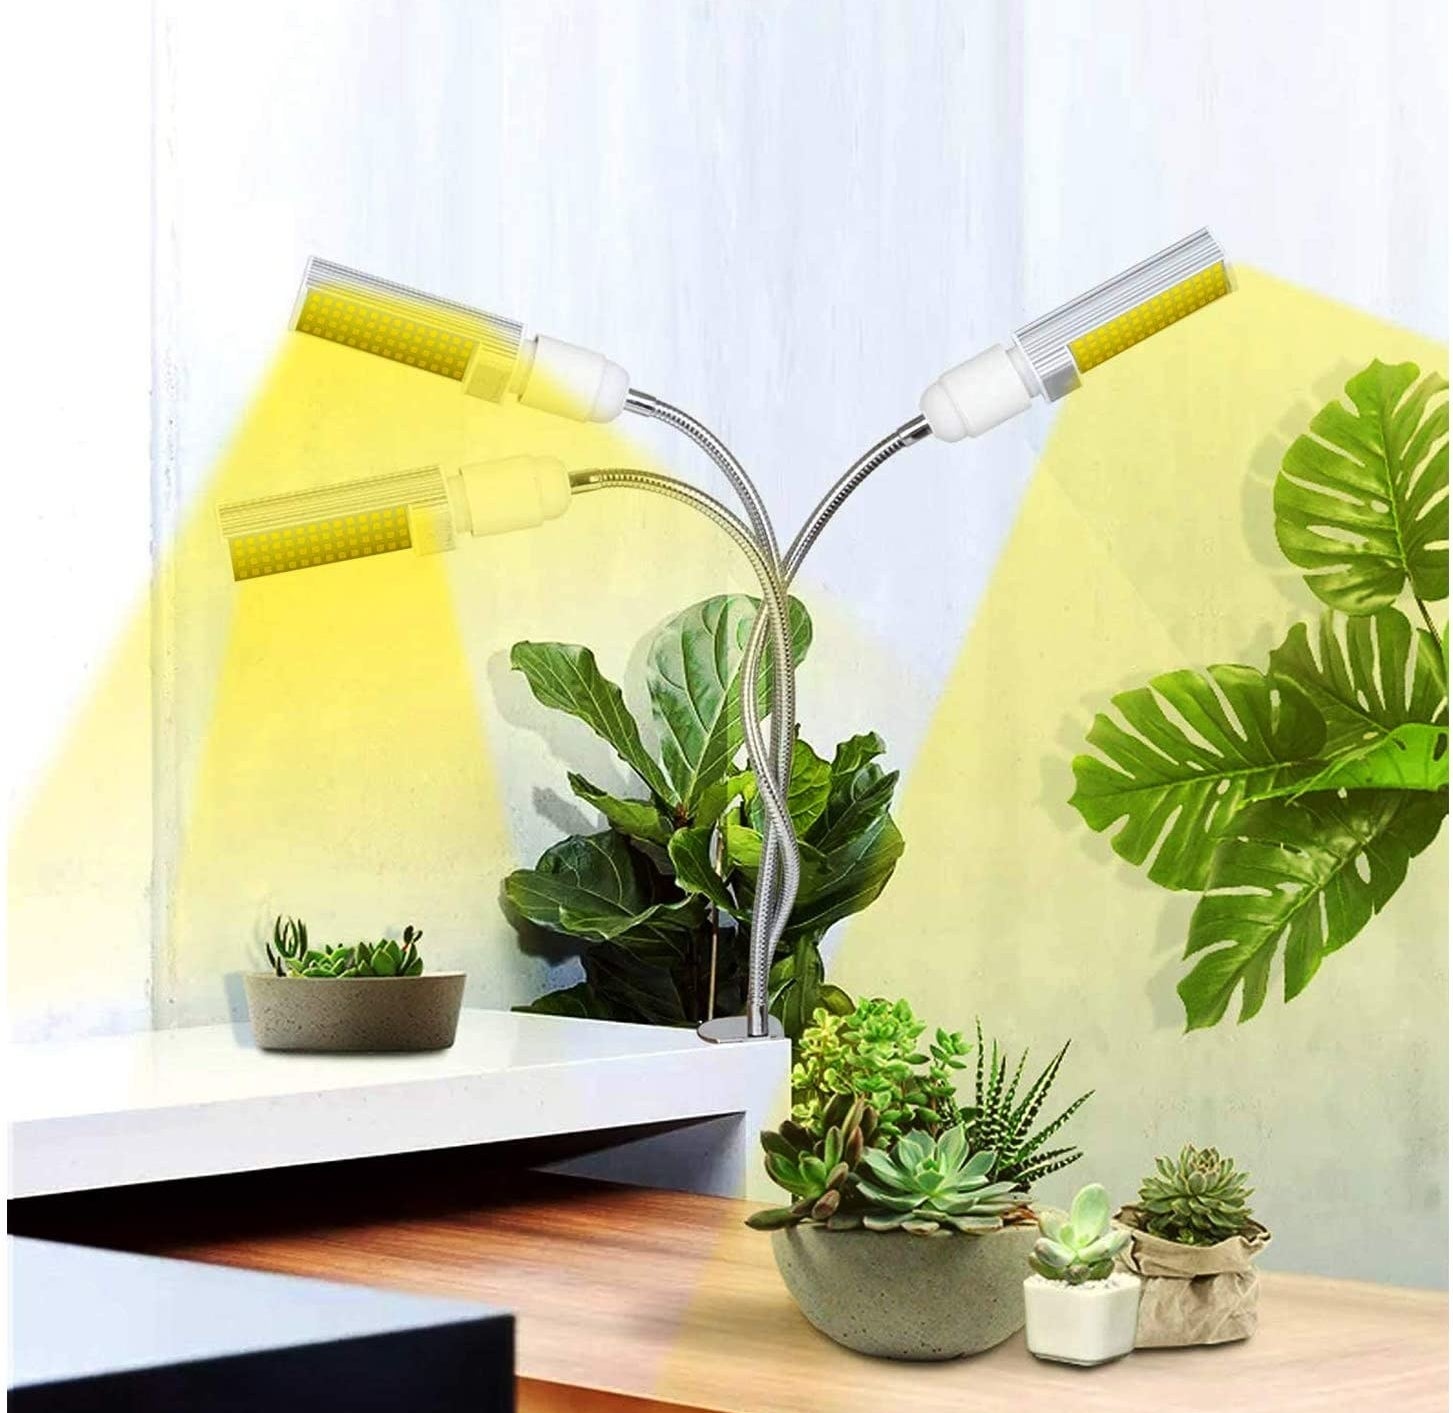 The grow light surrounded by plants